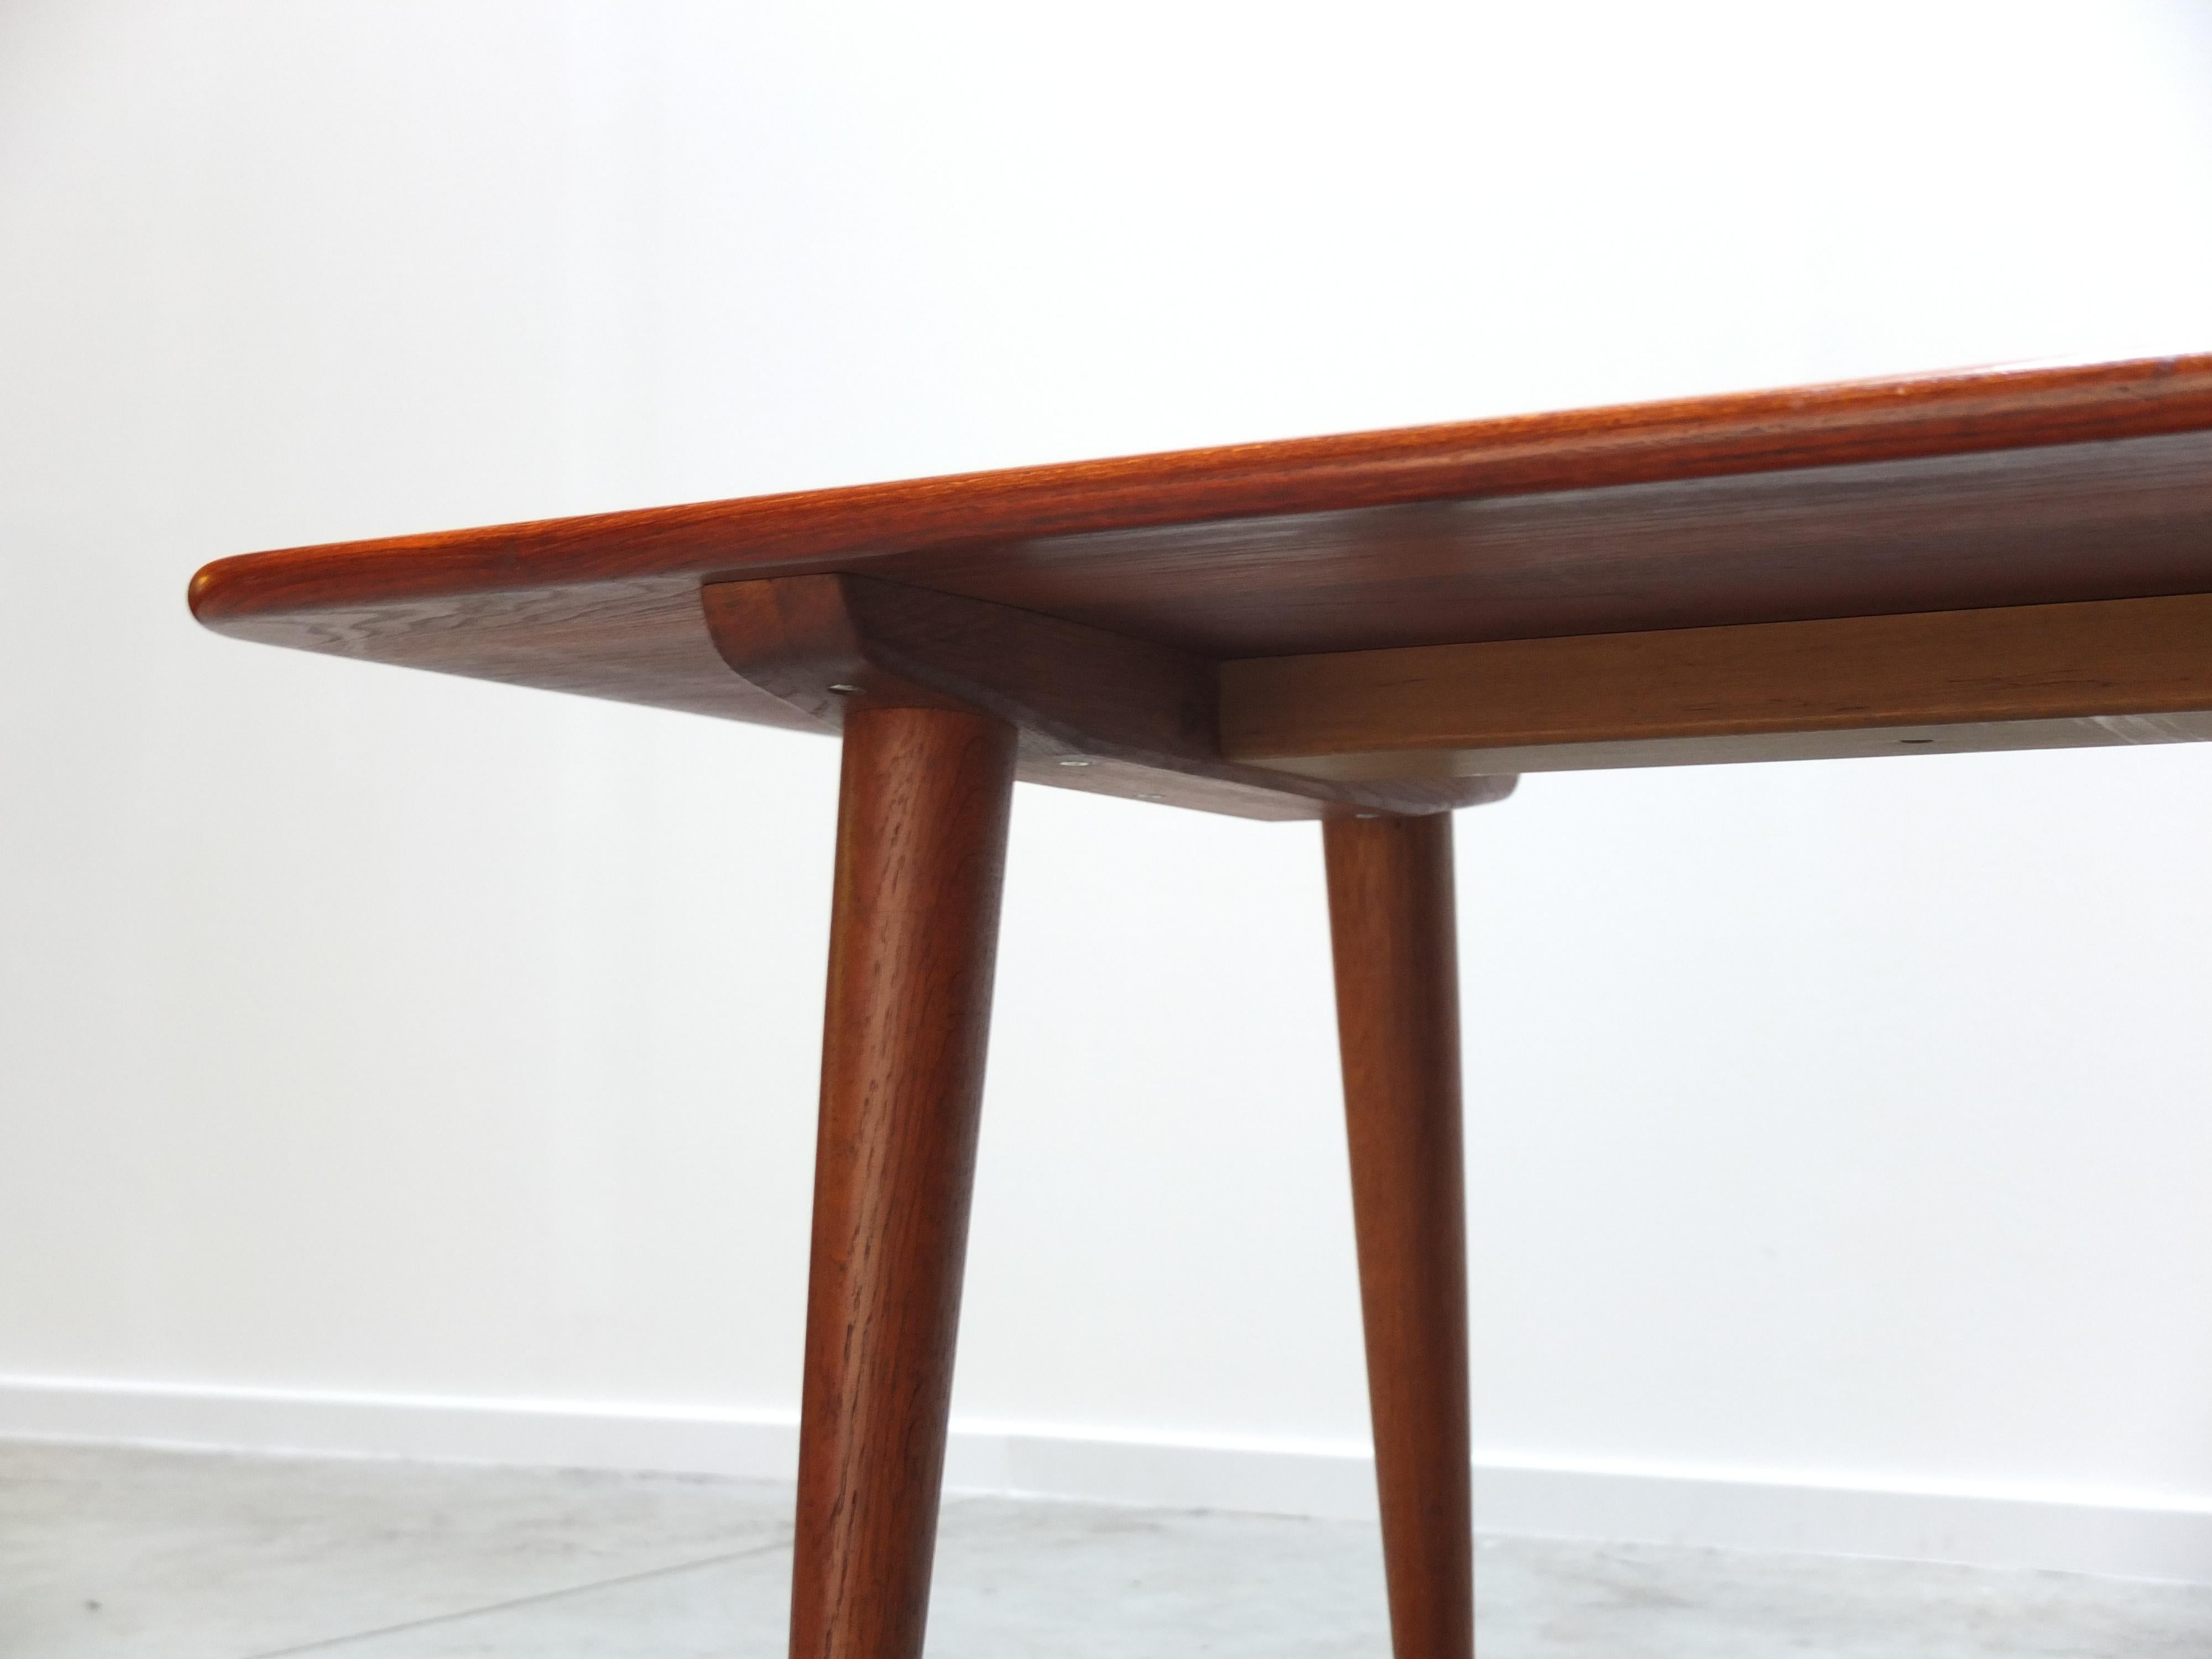 Teak & Oak 'At-11' Coffee Table by Hans Wegner for Andreas Tuck, 1950s For Sale 4